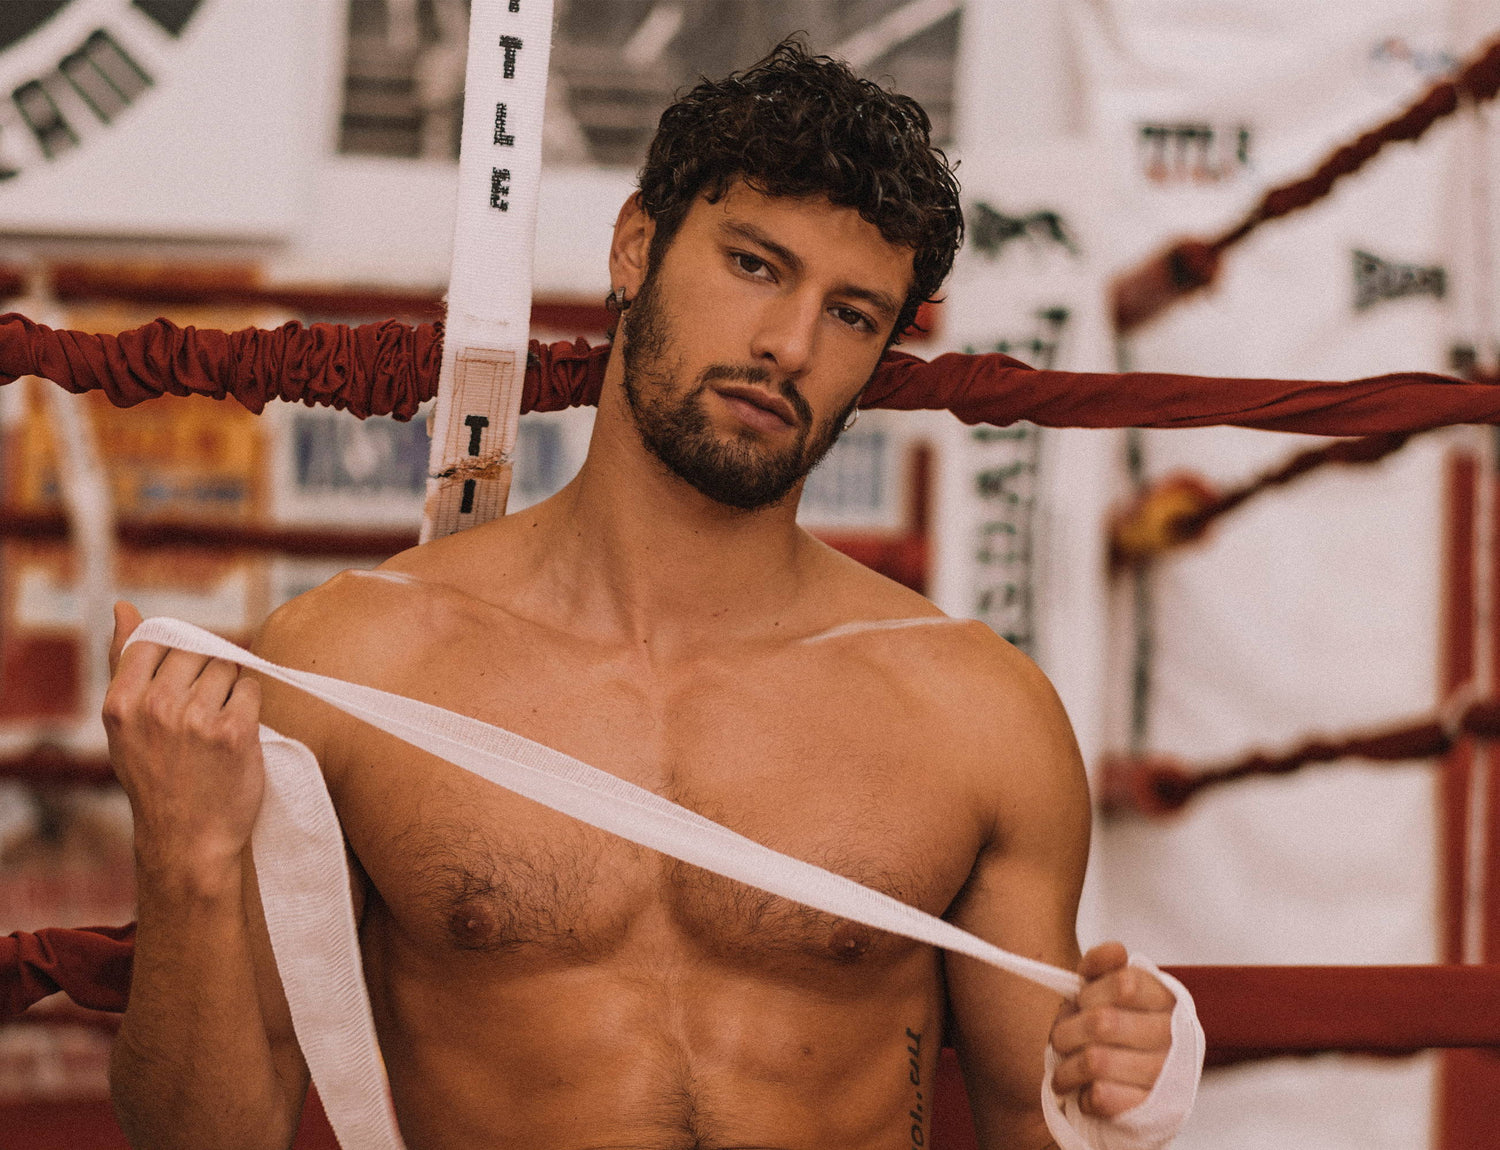 Jhonatan Mujica shares his experience shooting Fight Club for Yummy Issue Six naked in a boxing club and share their yummy side